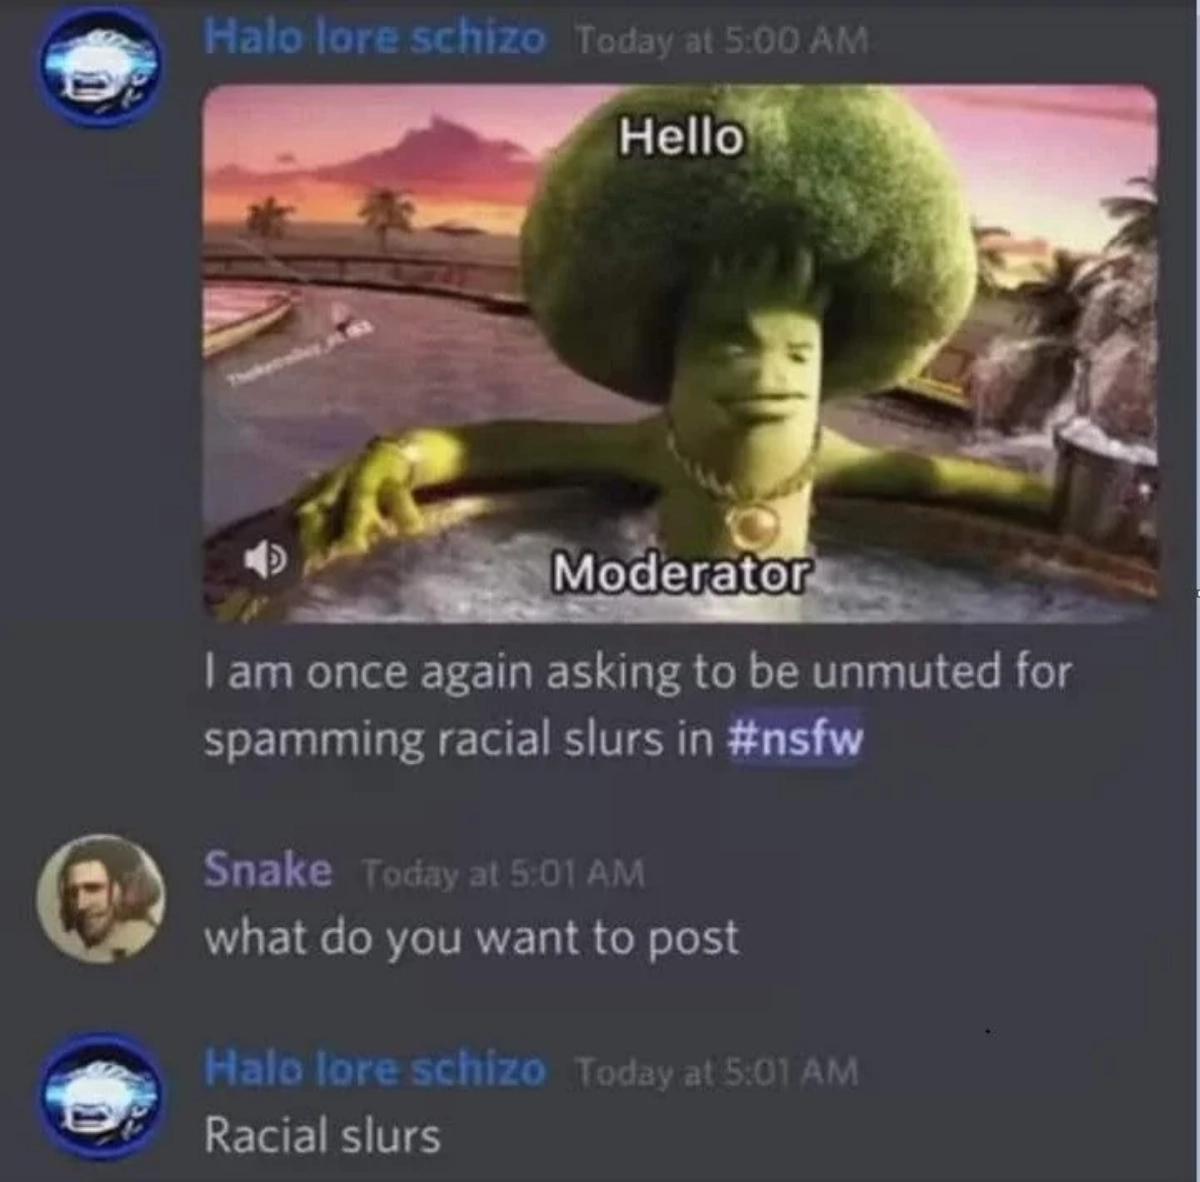 dank memes - gangster broccoli - Halo lore schizo Today at Hello Moderator I am once again asking to be unmuted for spamming racial slurs in Snake Today at what do you want to post Halo lore schizo Today at Racial slurs